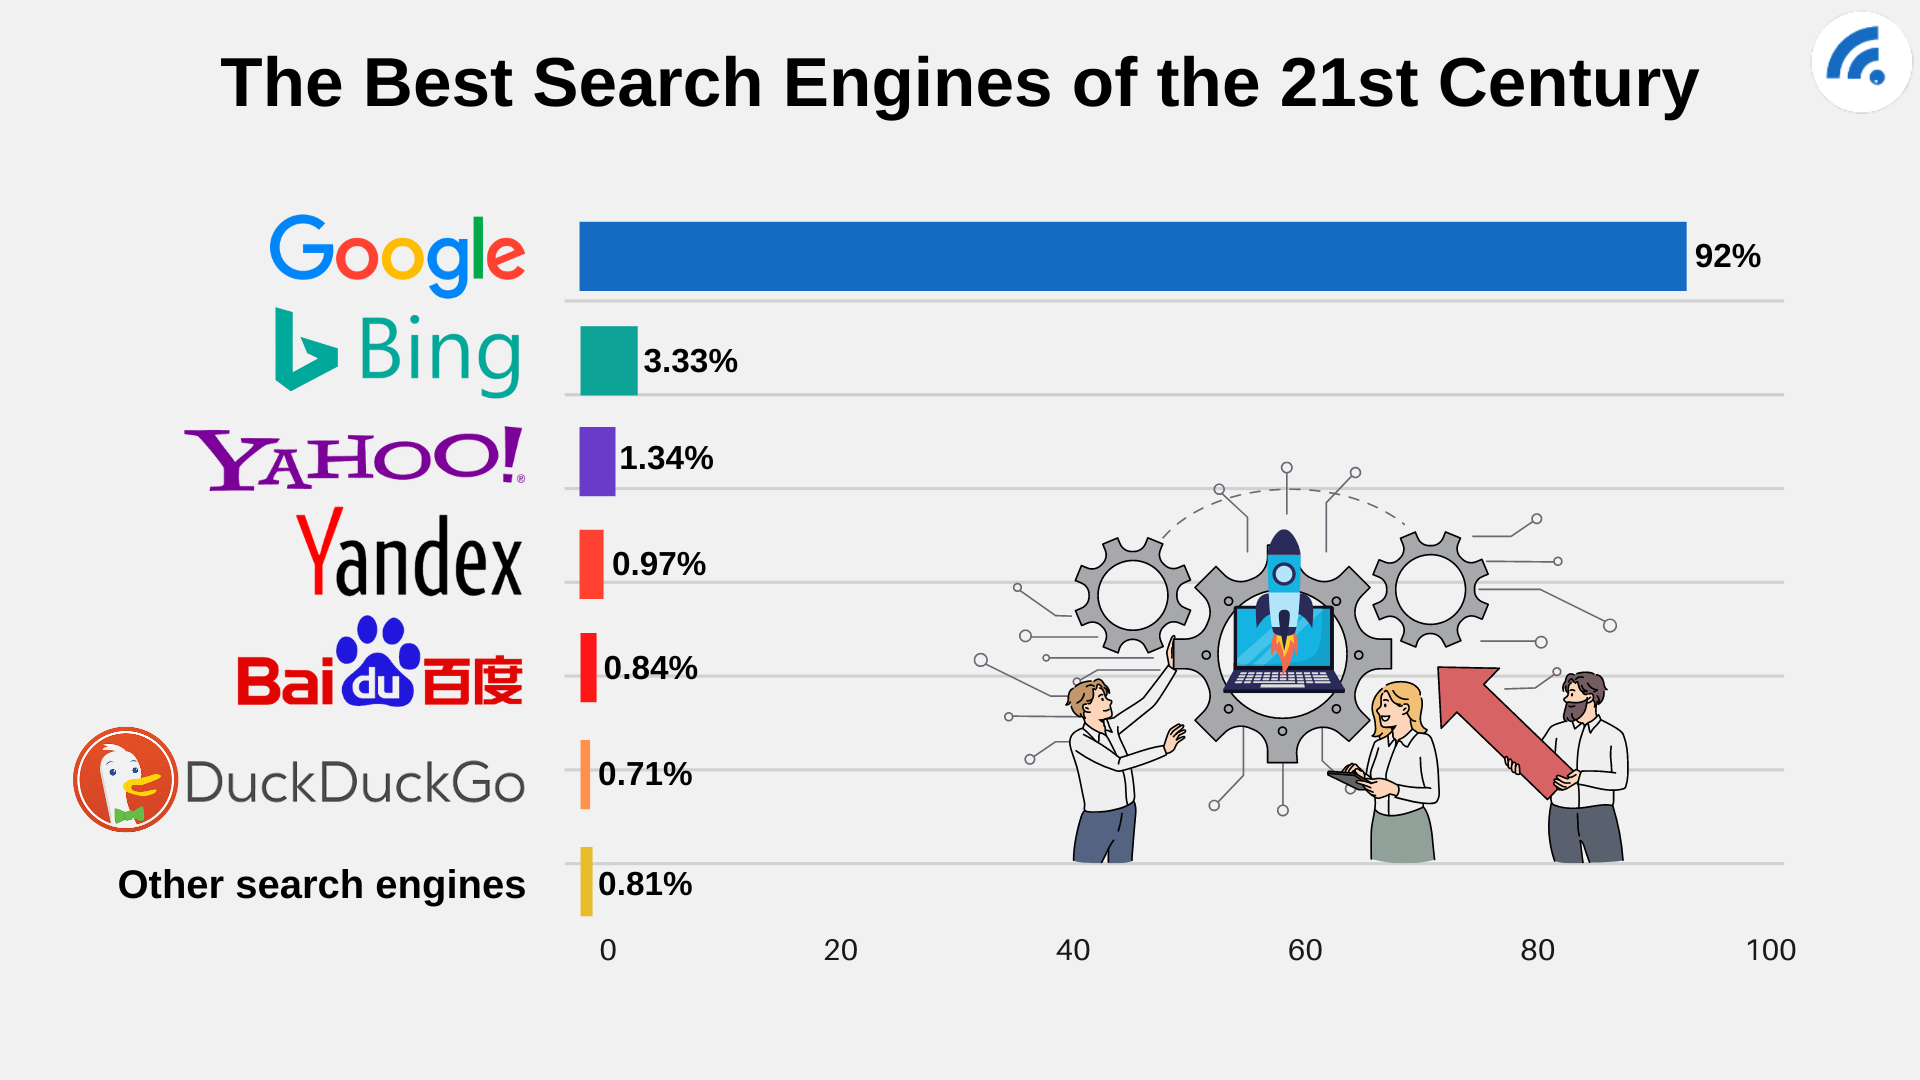 What is the best search engine after Google?